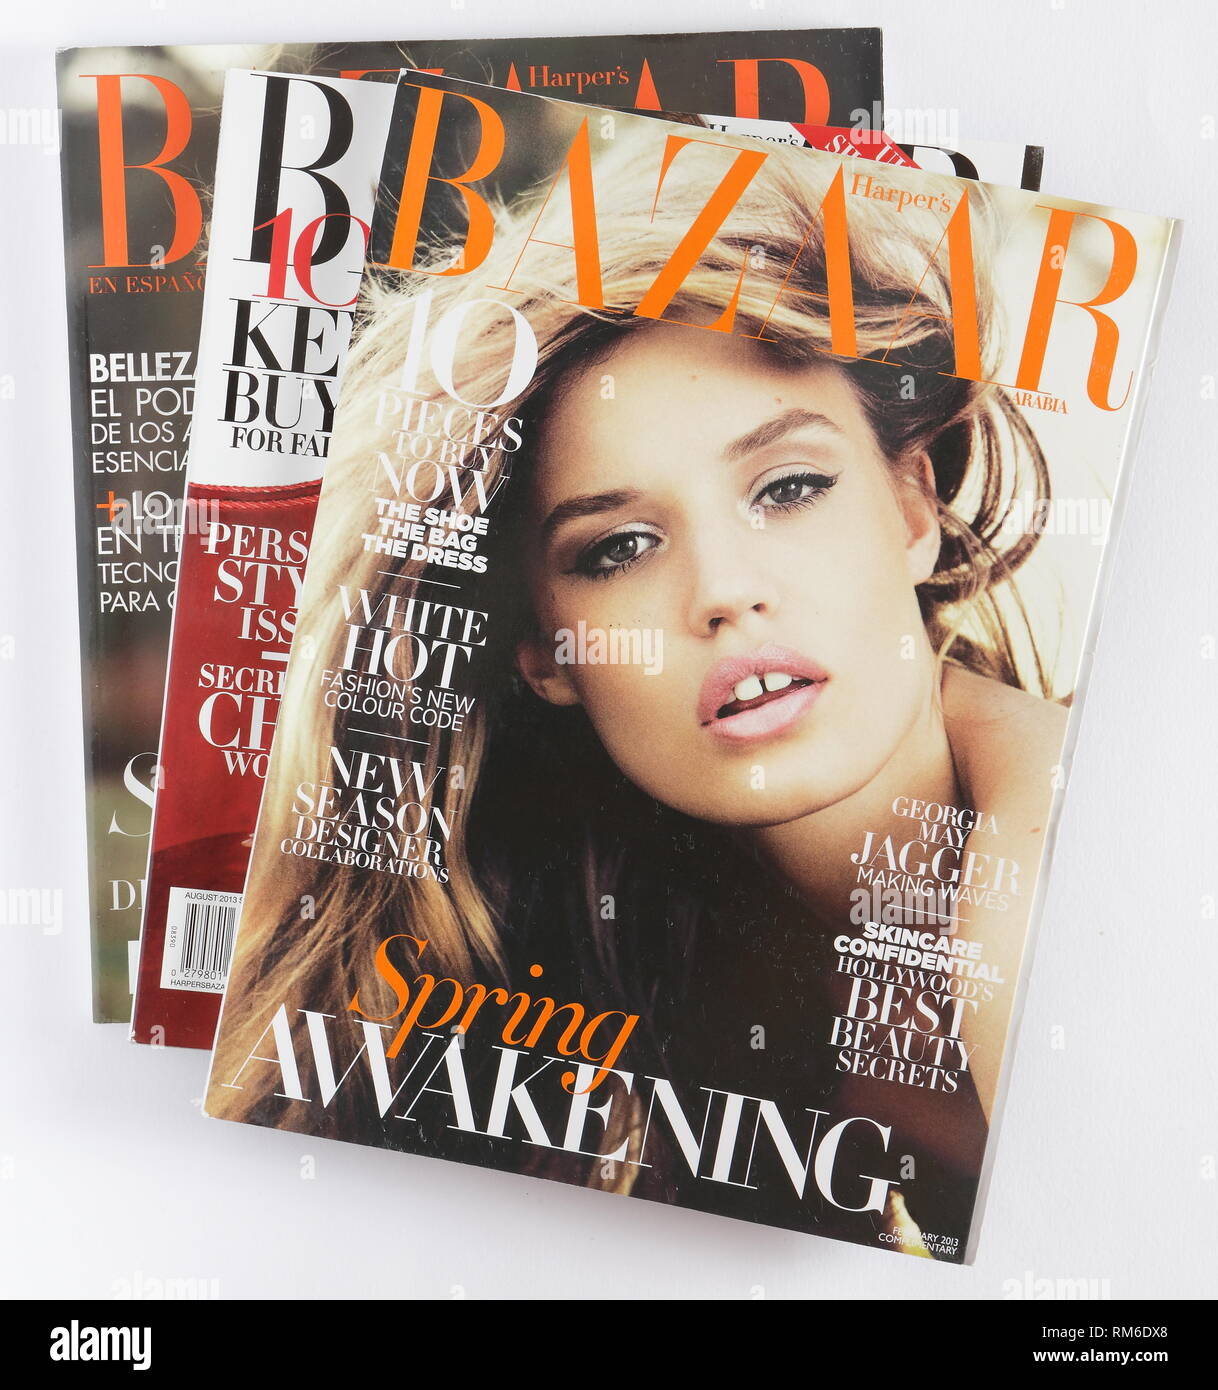 CZECH - MAY 21, 2015: Stack of magazines Harpers Bazaar, on top issue February 2013 with Georgia May Jagger on cover. Editorial use only. Stock Photo